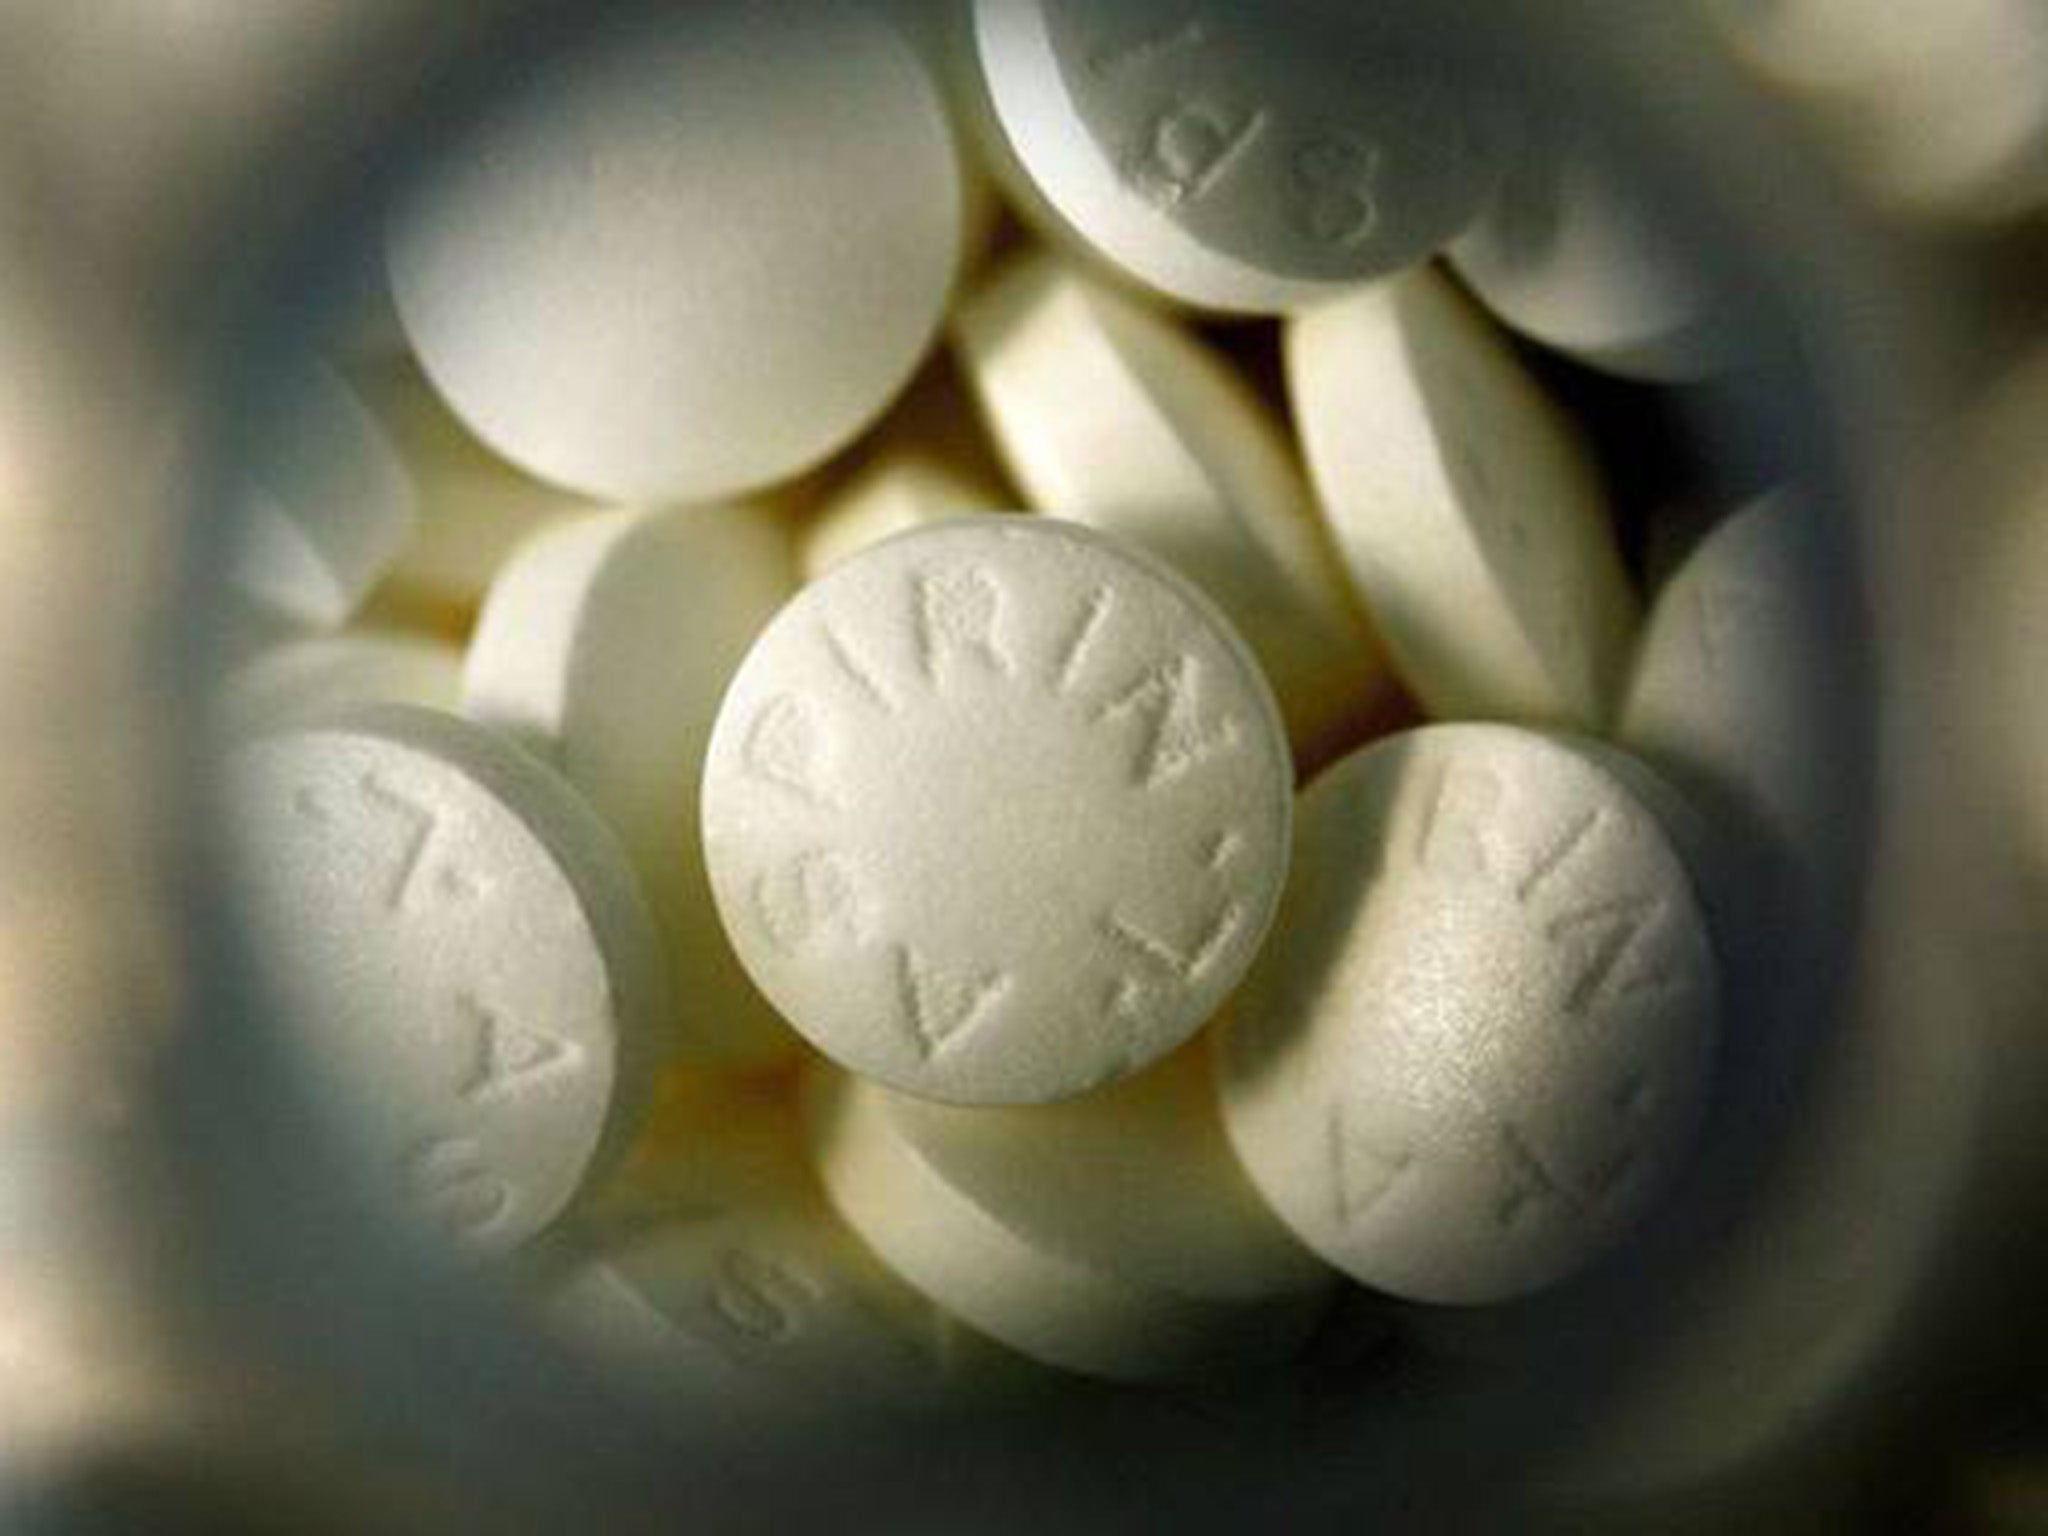 Aspirin is considered less effective than other drugs in preventing strokes